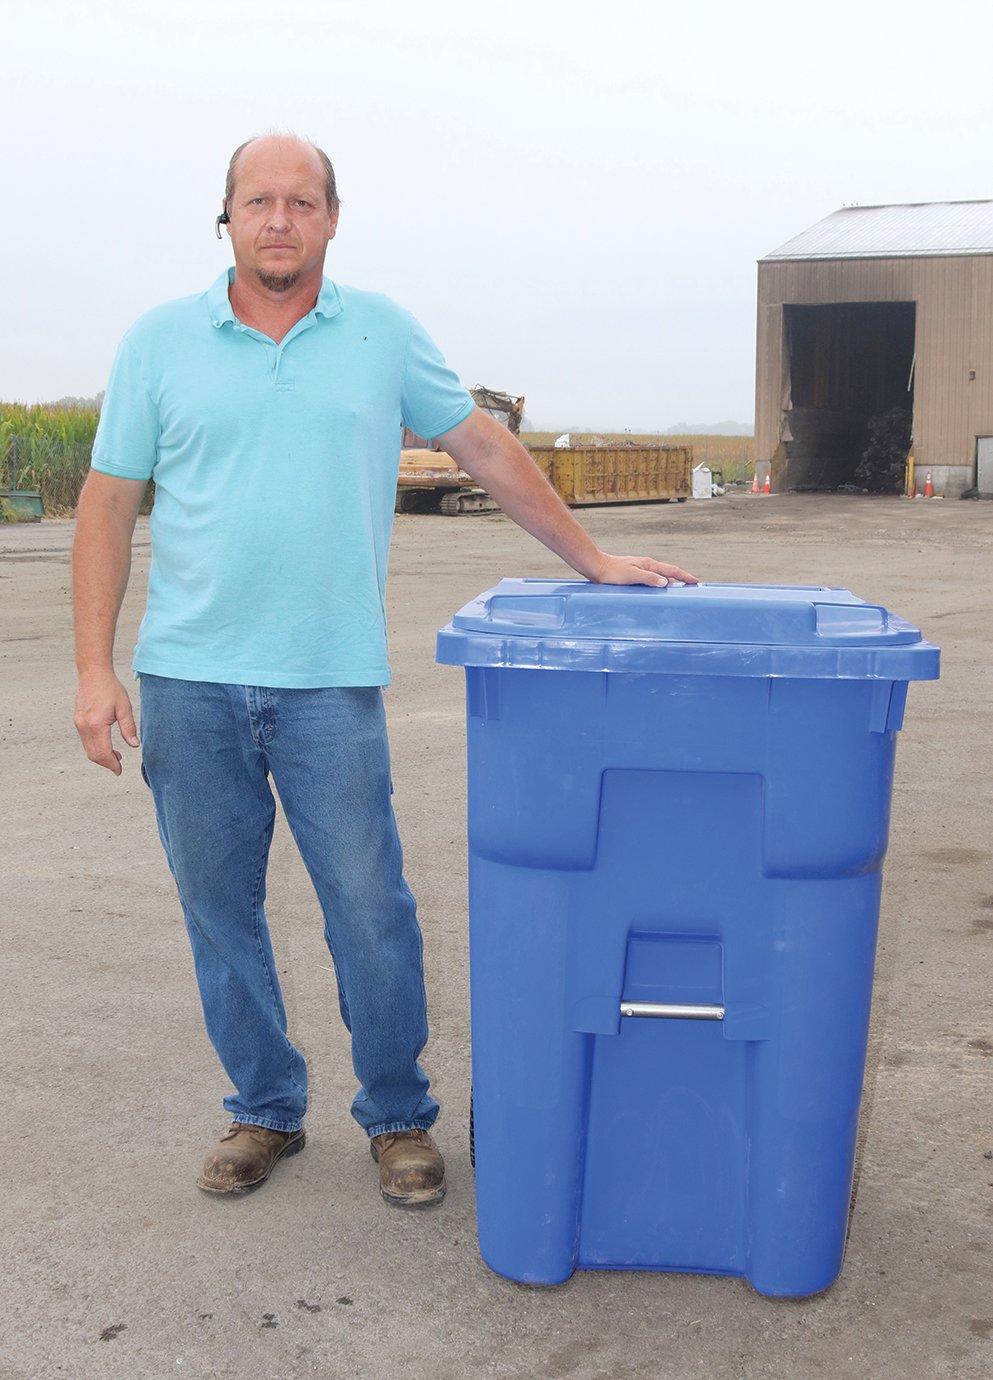 Sam Newlin, proprietor of T&S Trash Service, shows off the new design of his company's trash cans, also known as "toters," which are designed to be used with a fully automated trucks. The toters, to be painted brown, are reinforced in areas where the automated "arm" makes contact with the can, and feature a metal crossbar for extra grip. The 95-gallon, redesigned cans are shorter and wider than their predecessors to allow more room for waste and ease of use.